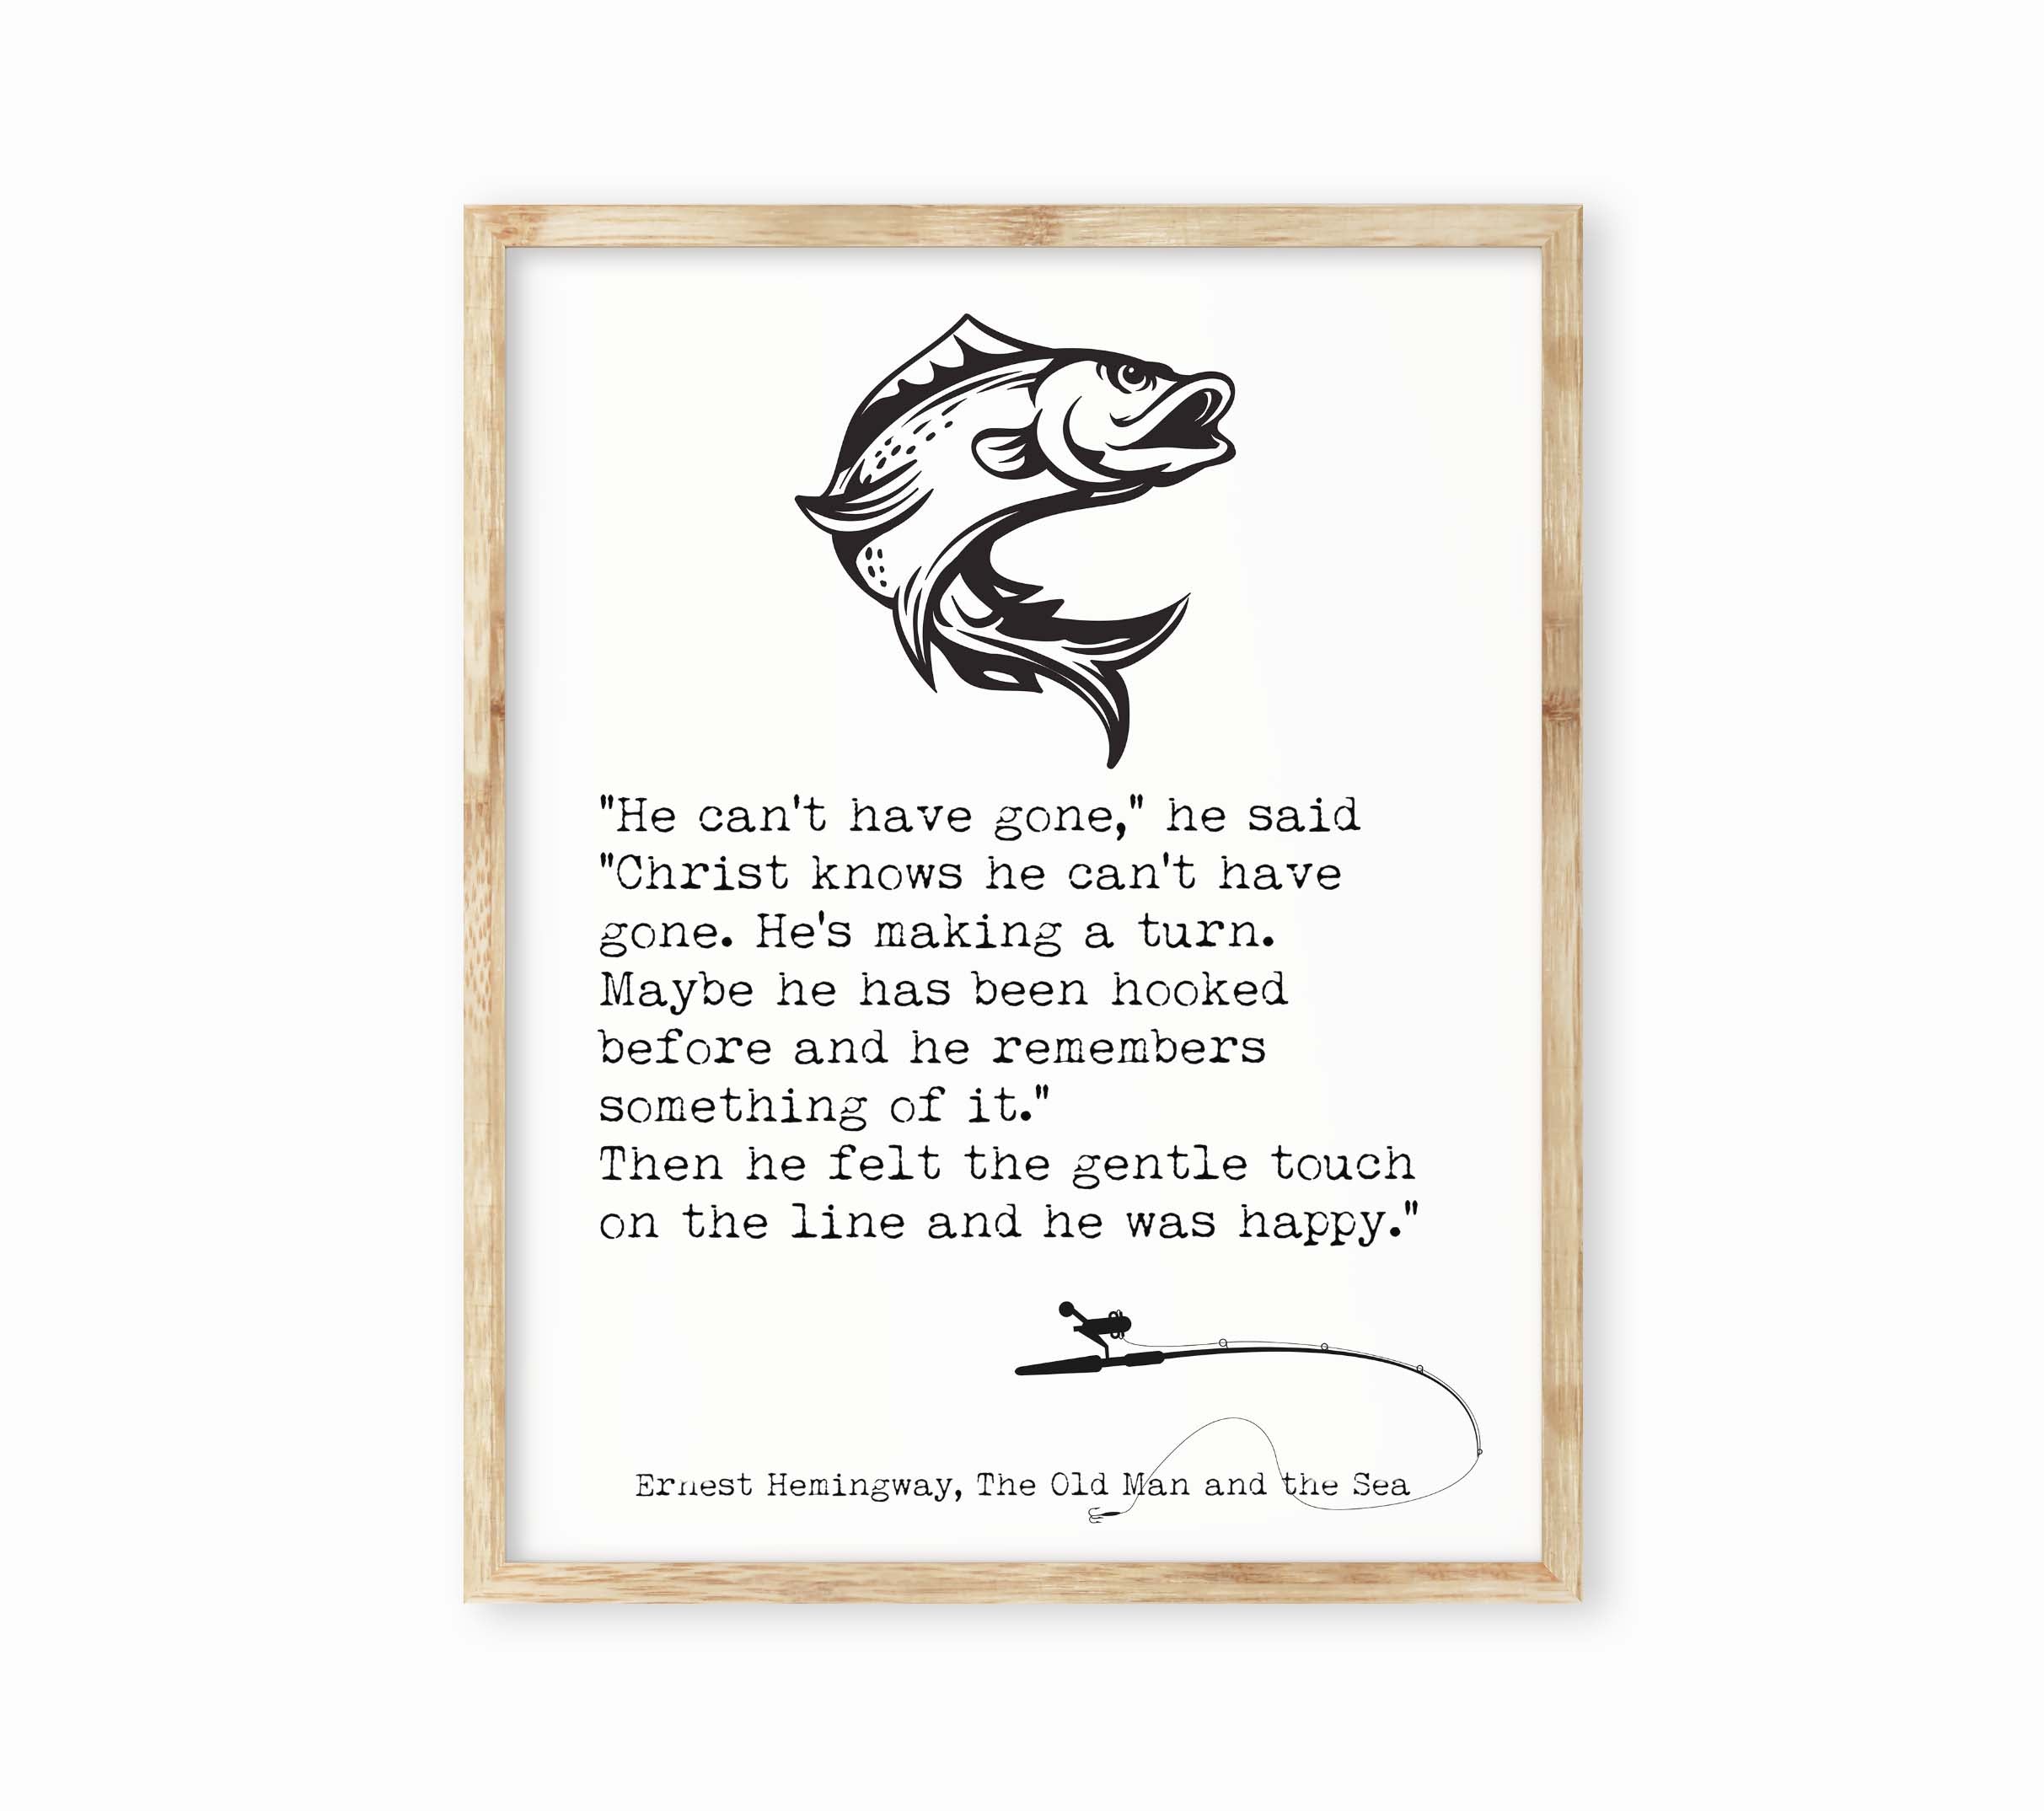 Ernest Hemingway The Old Man and the Sea Print